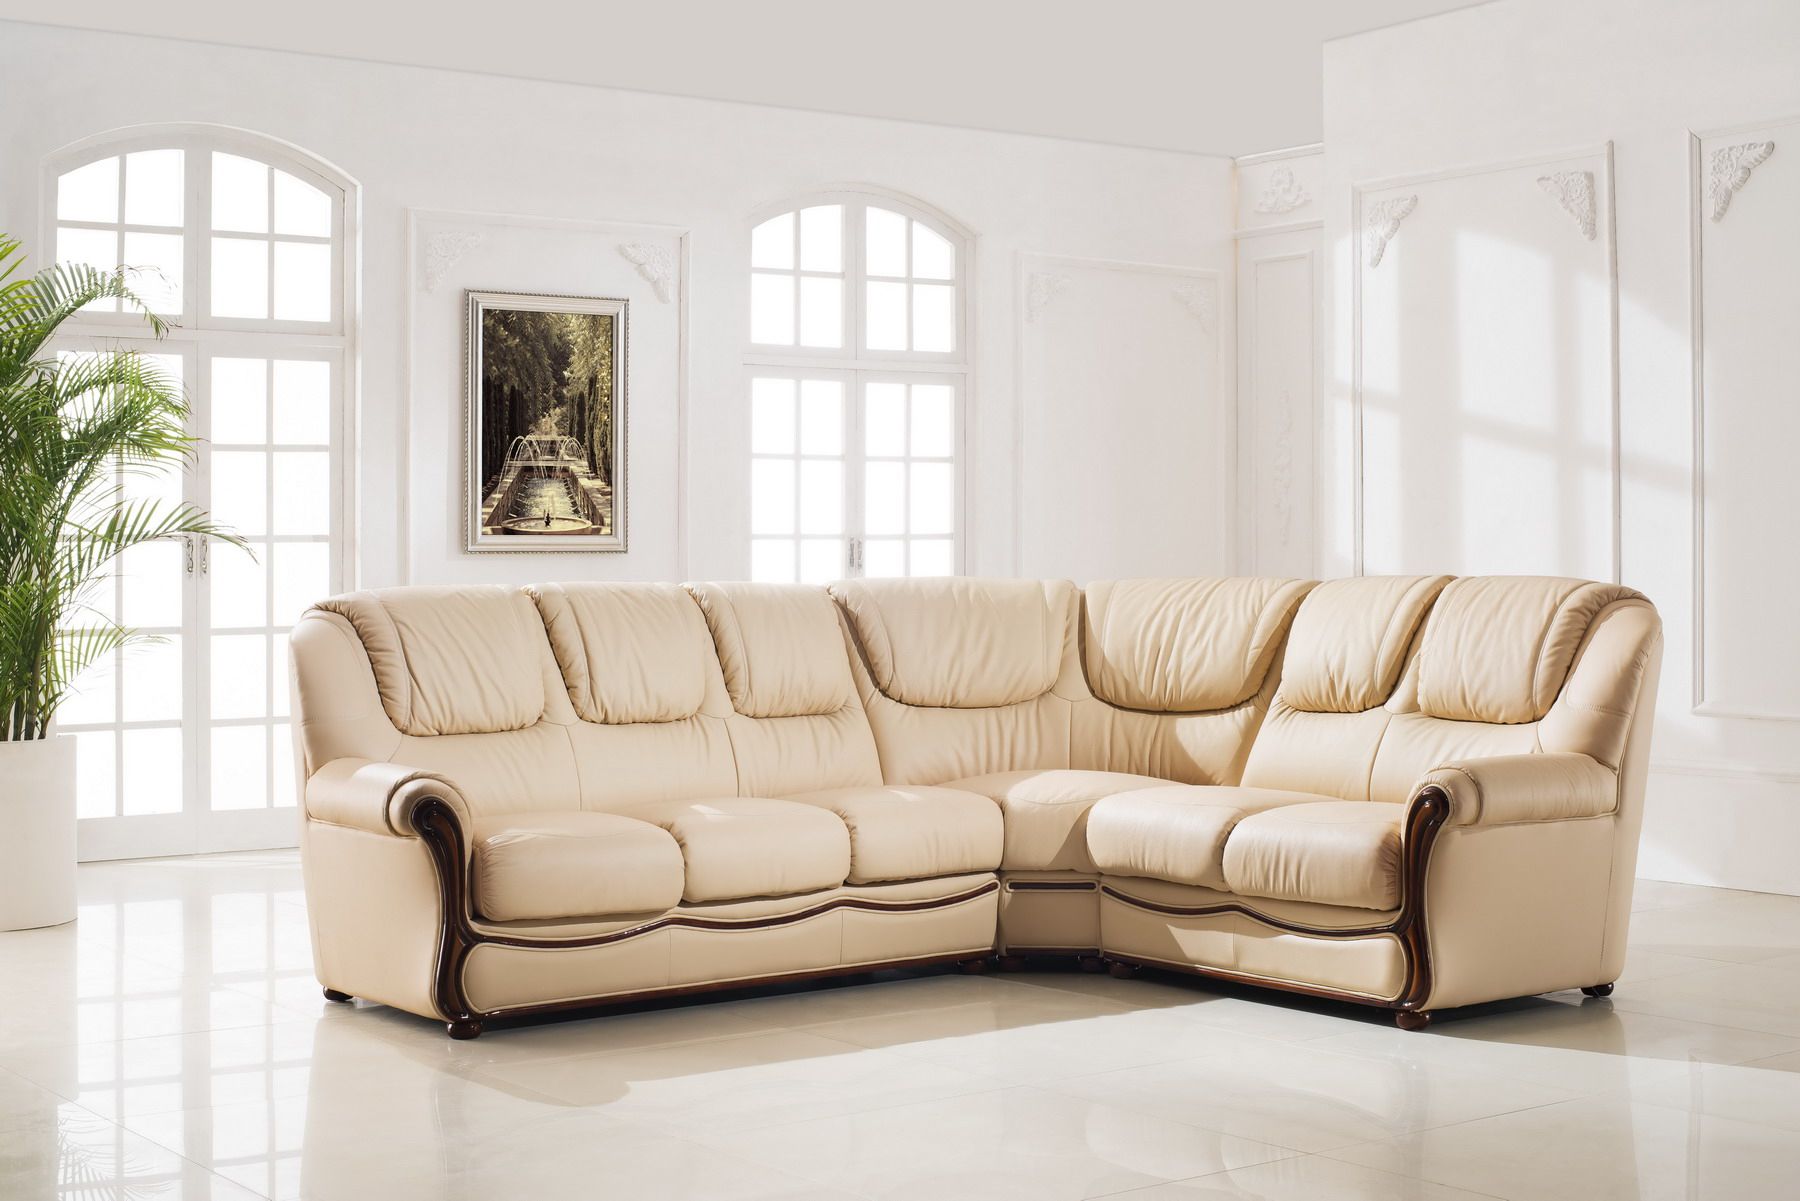 Esf 102 Top Grain Italian Leather Sectional W Bed Pertaining To [%matilda 100% Top Grain Leather Chaise Sectional Sofas|matilda 100% Top Grain Leather Chaise Sectional Sofas%] (View 4 of 15)